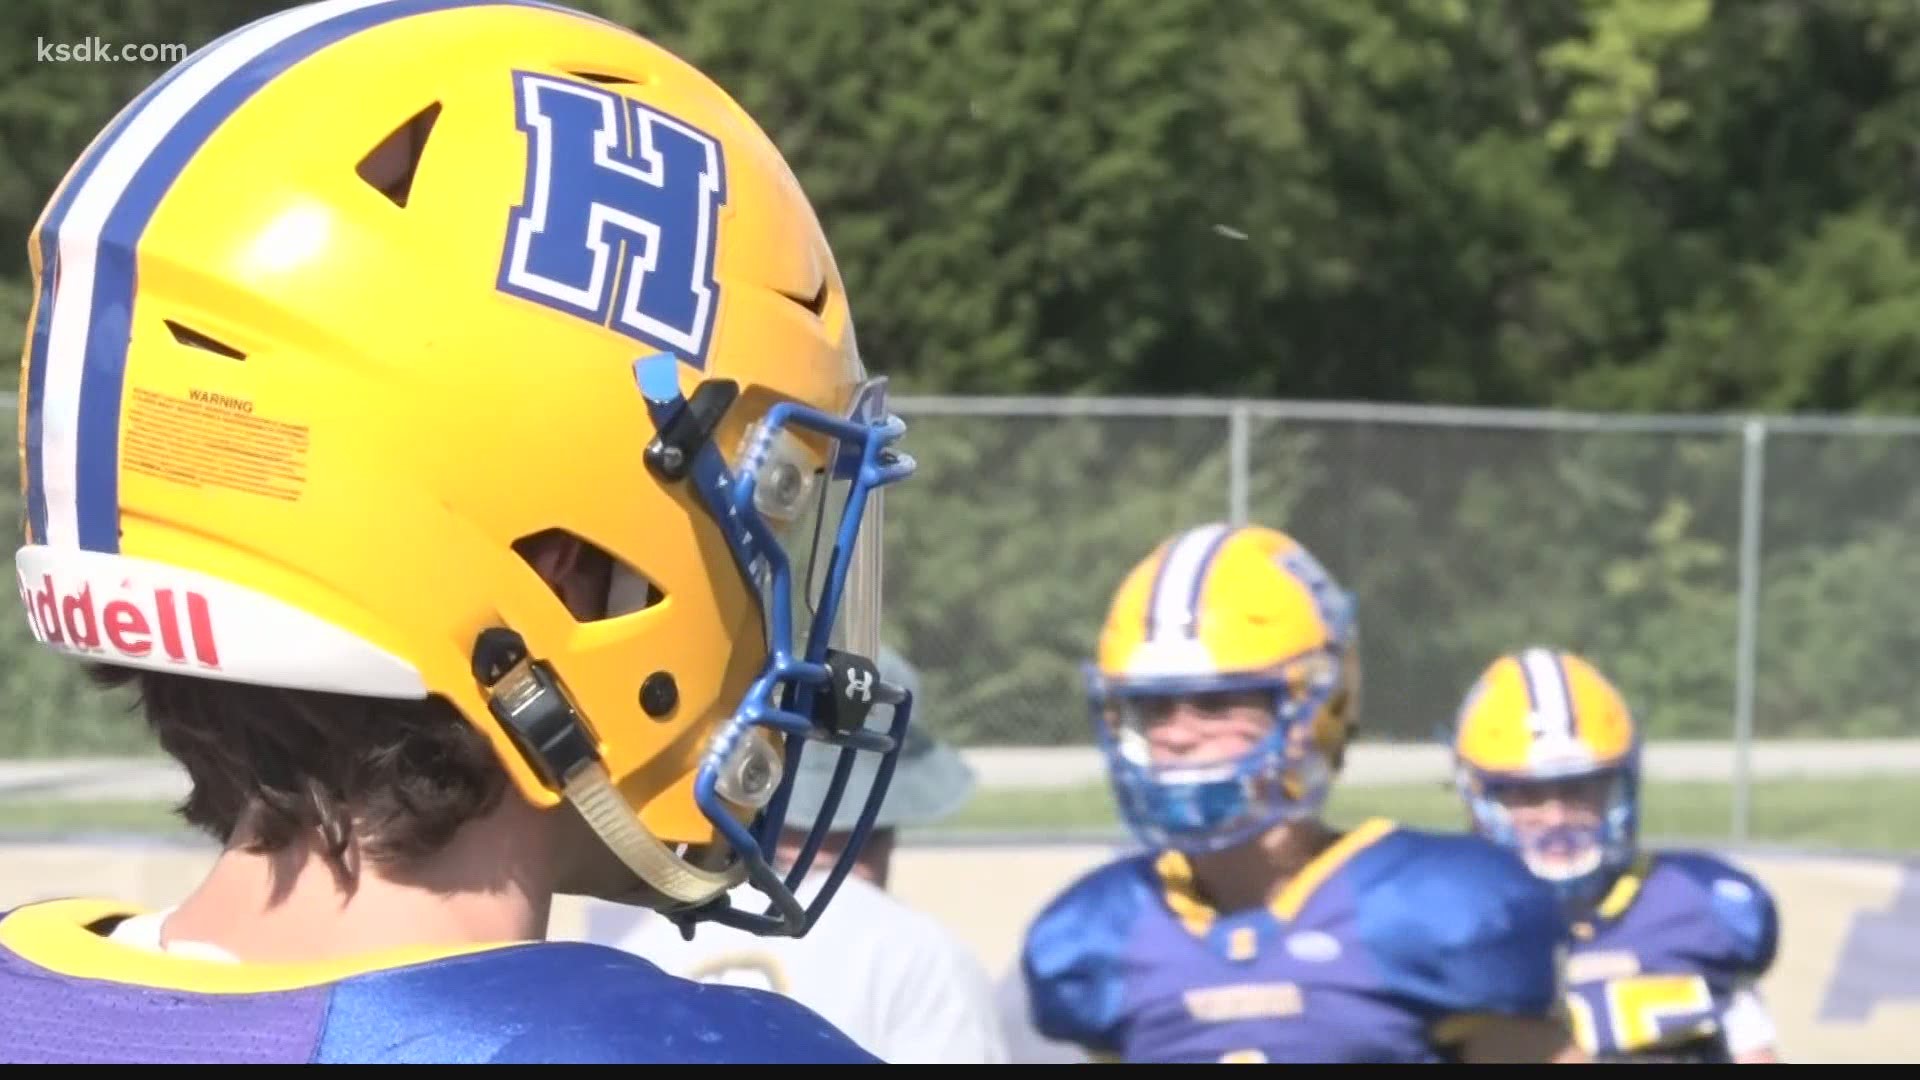 MSHSAA said it's looking into every scenario that may occur this season, but at the end of the day, the CDC and local health officials will have the final word.